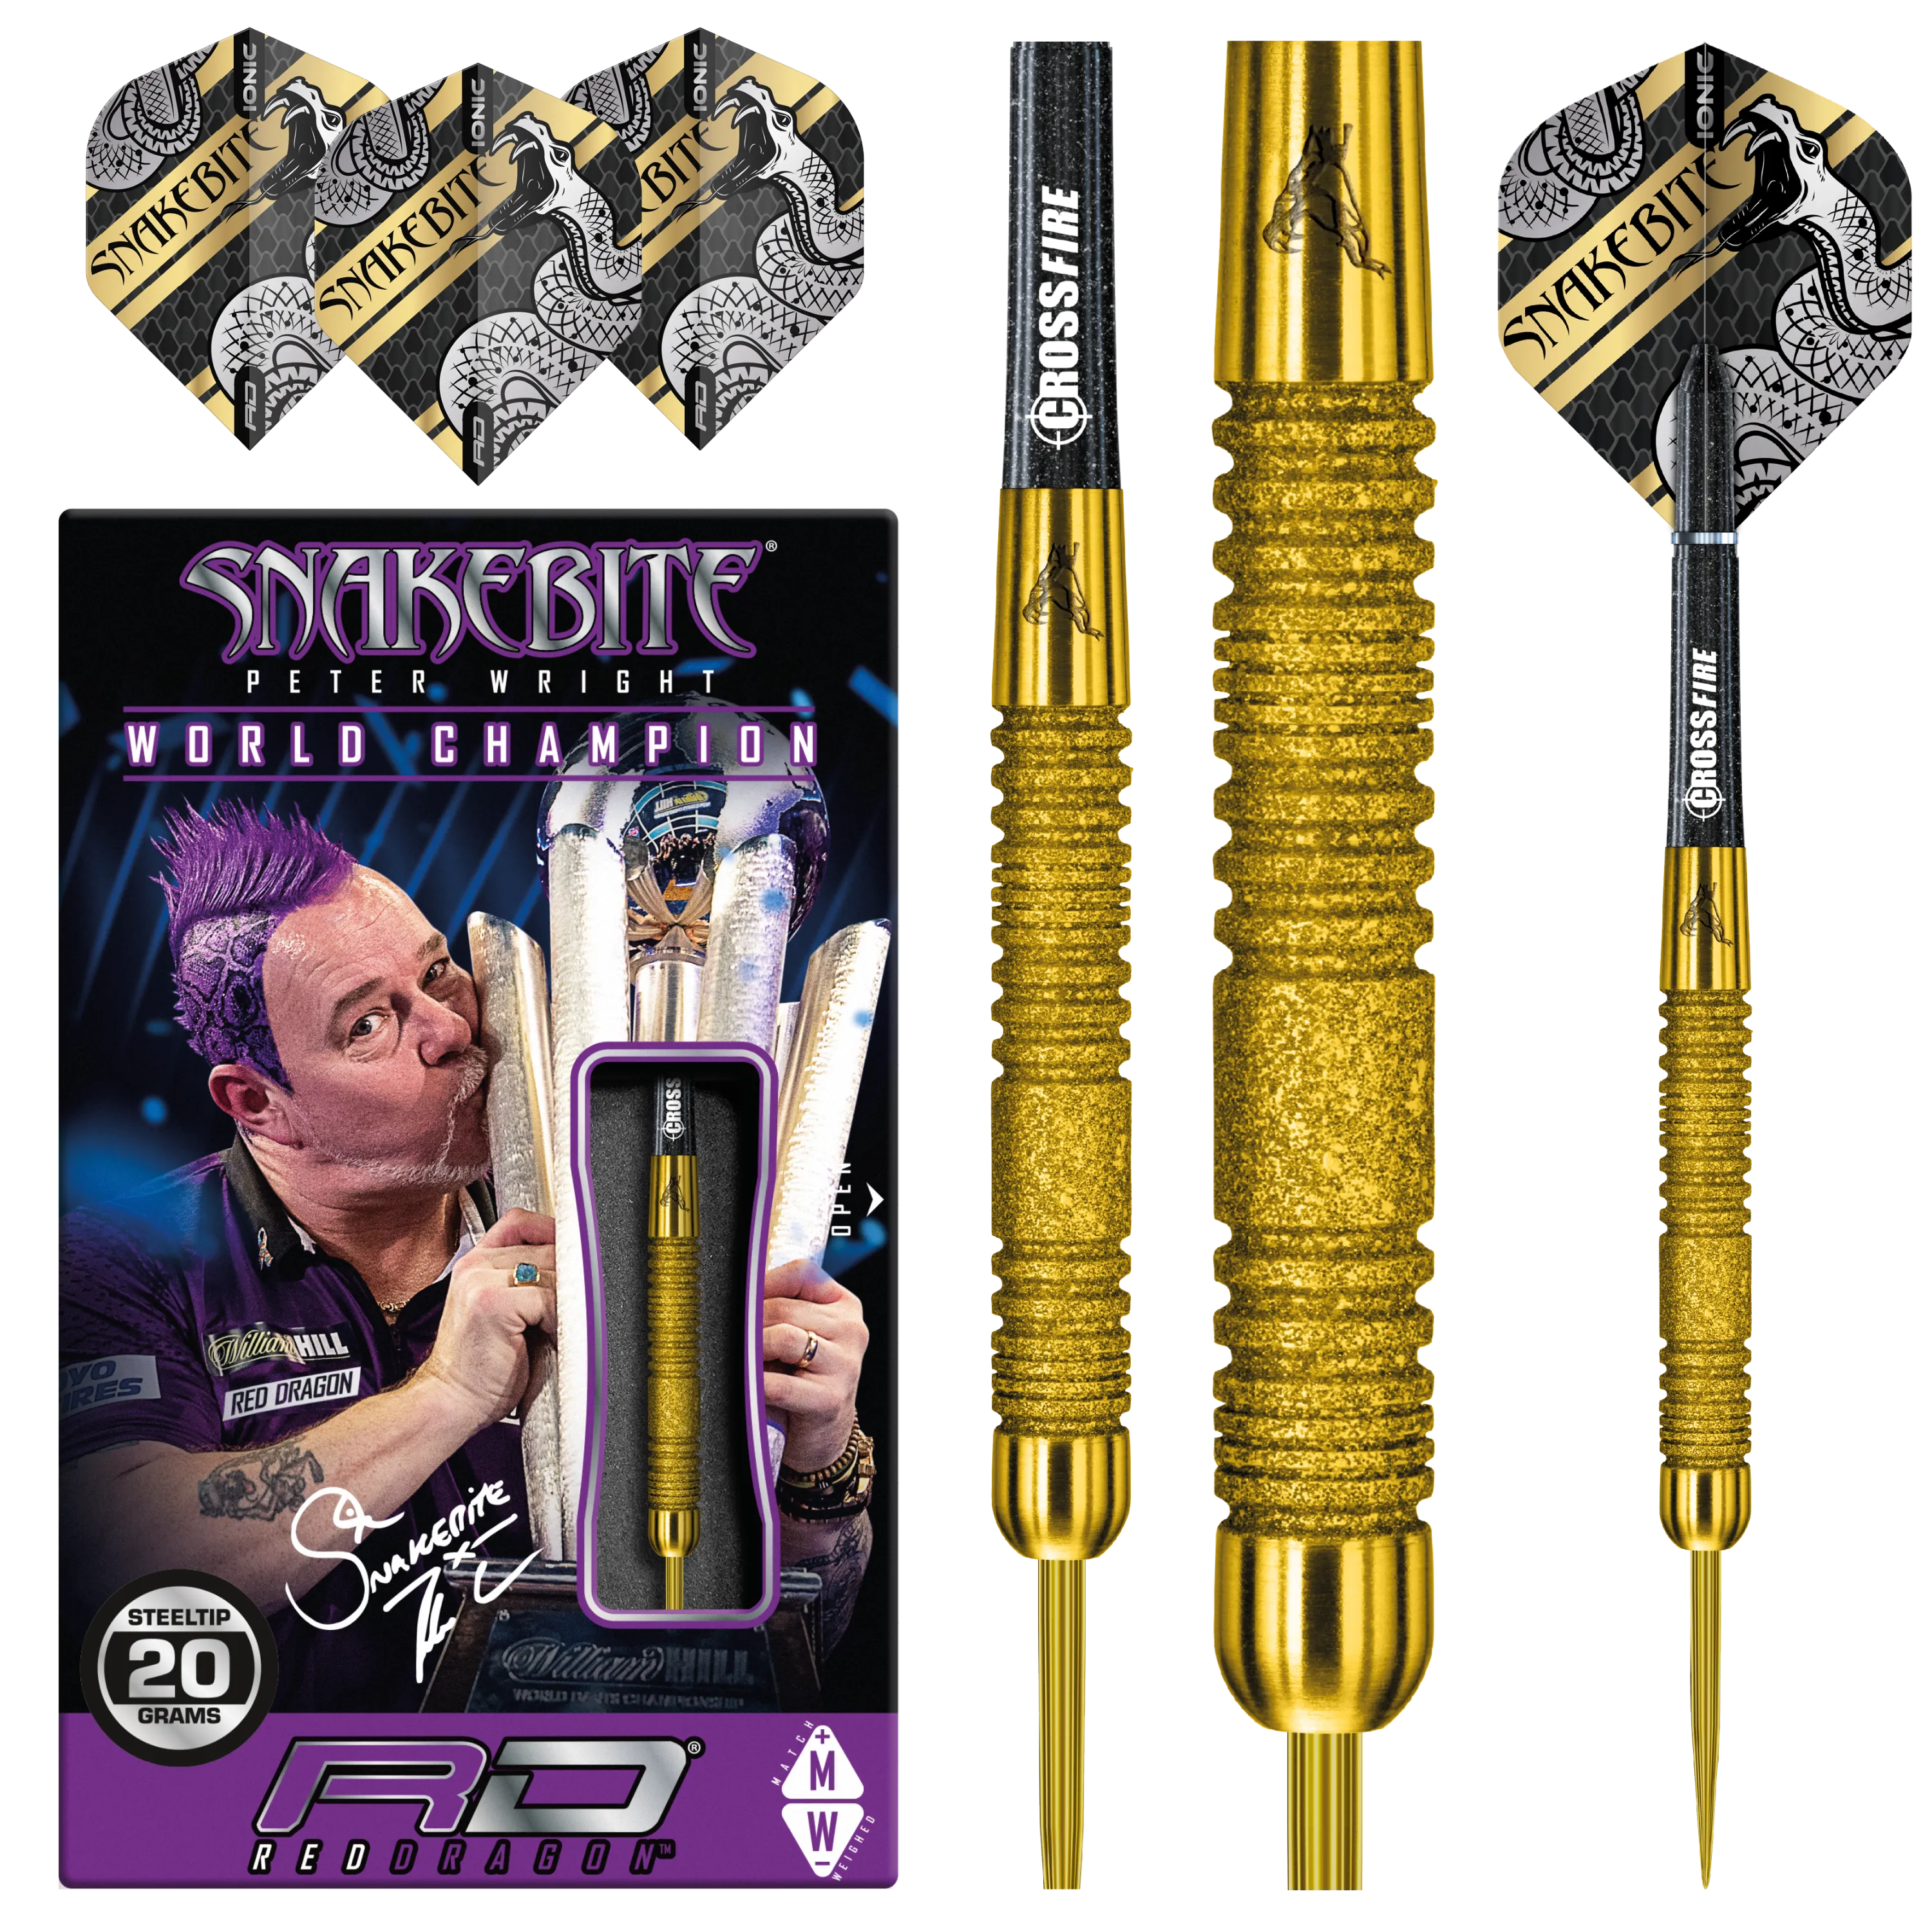 Red Dragon Peter Wright Euro 11 Element Gold PC 20 steel darts 20g, 24g 